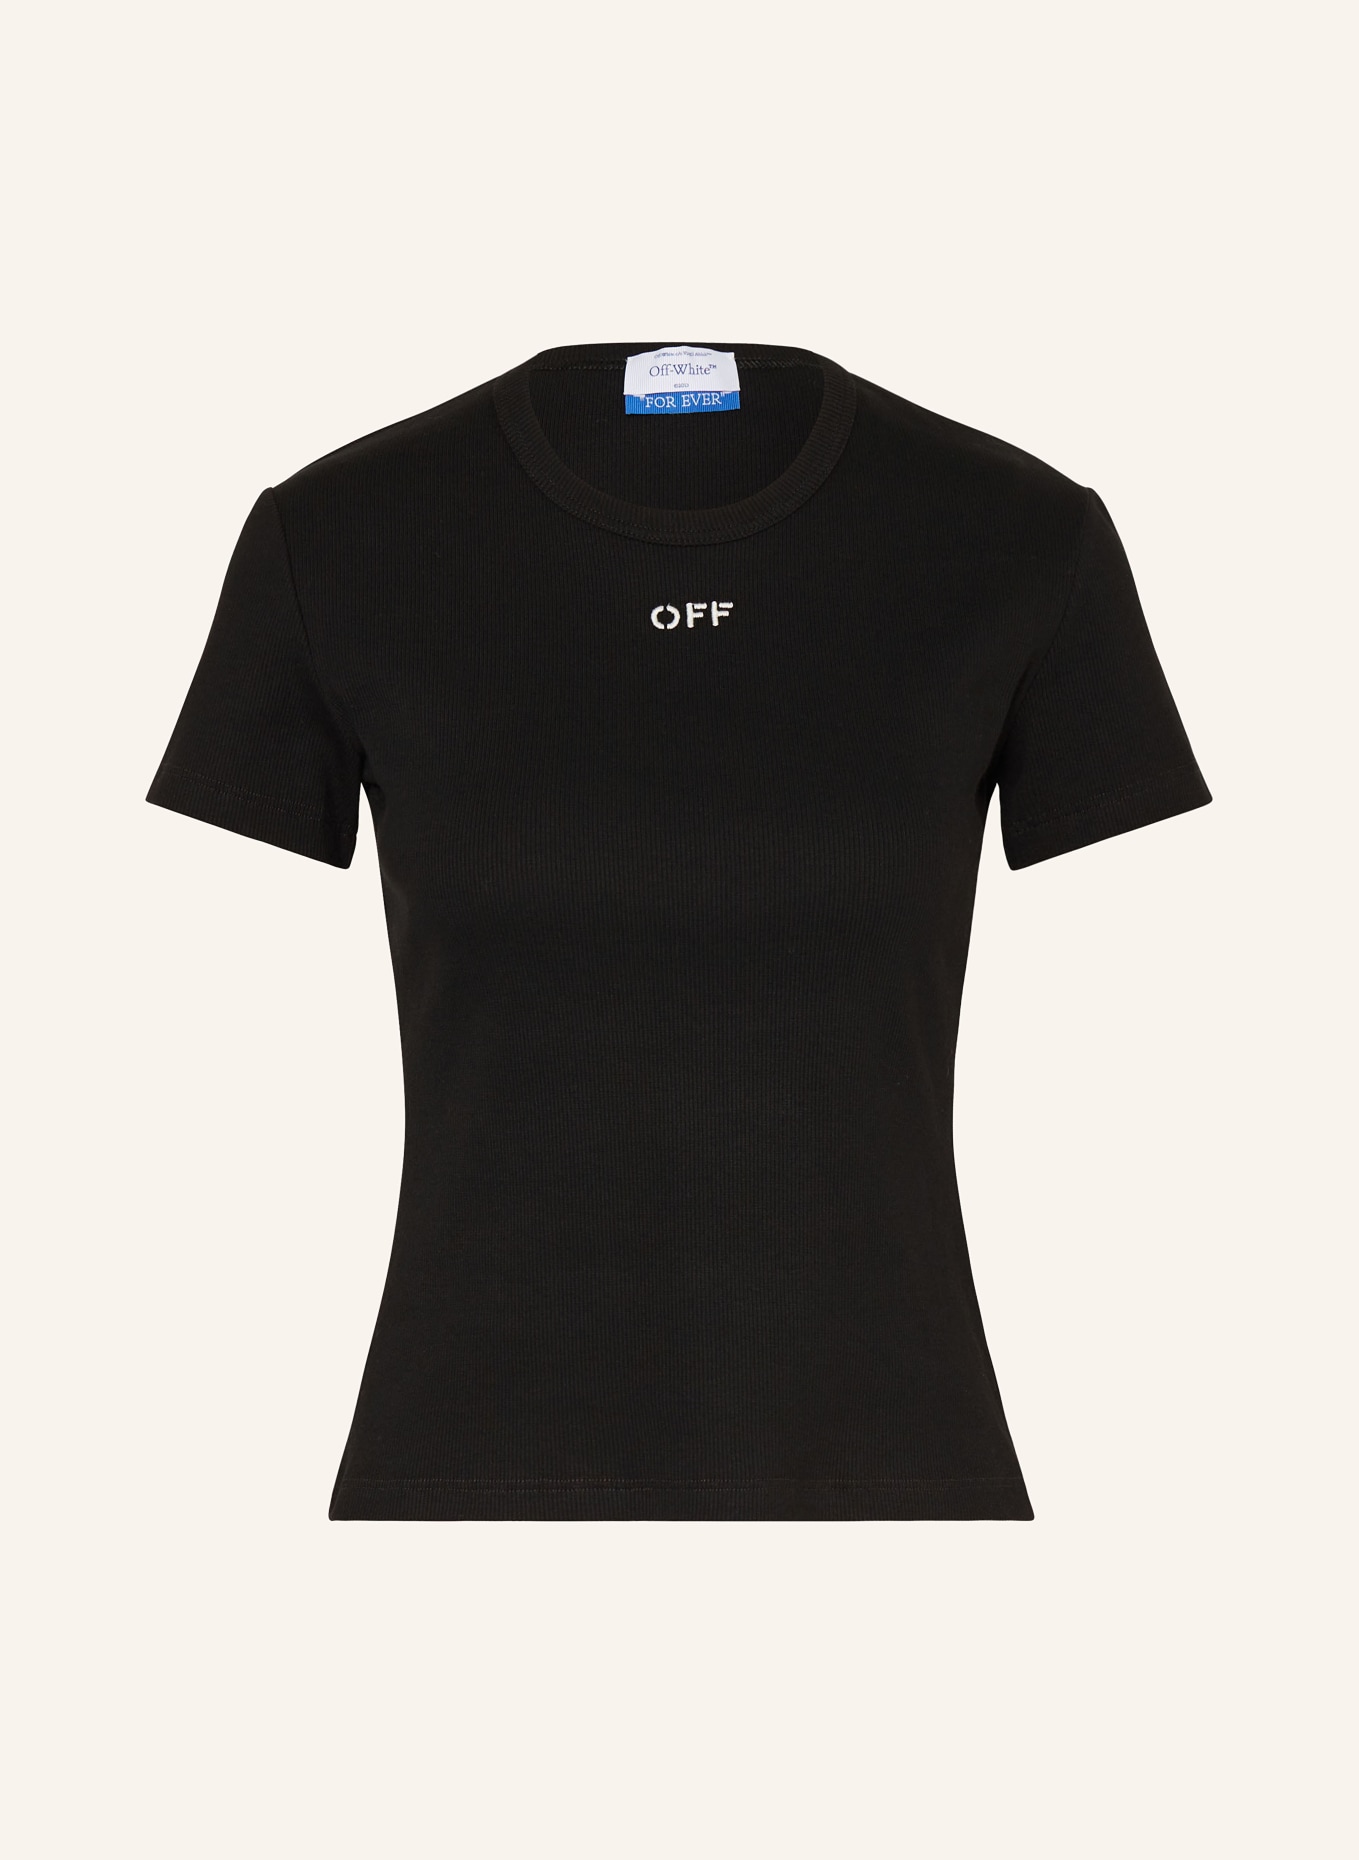 Off-White T-shirt in black